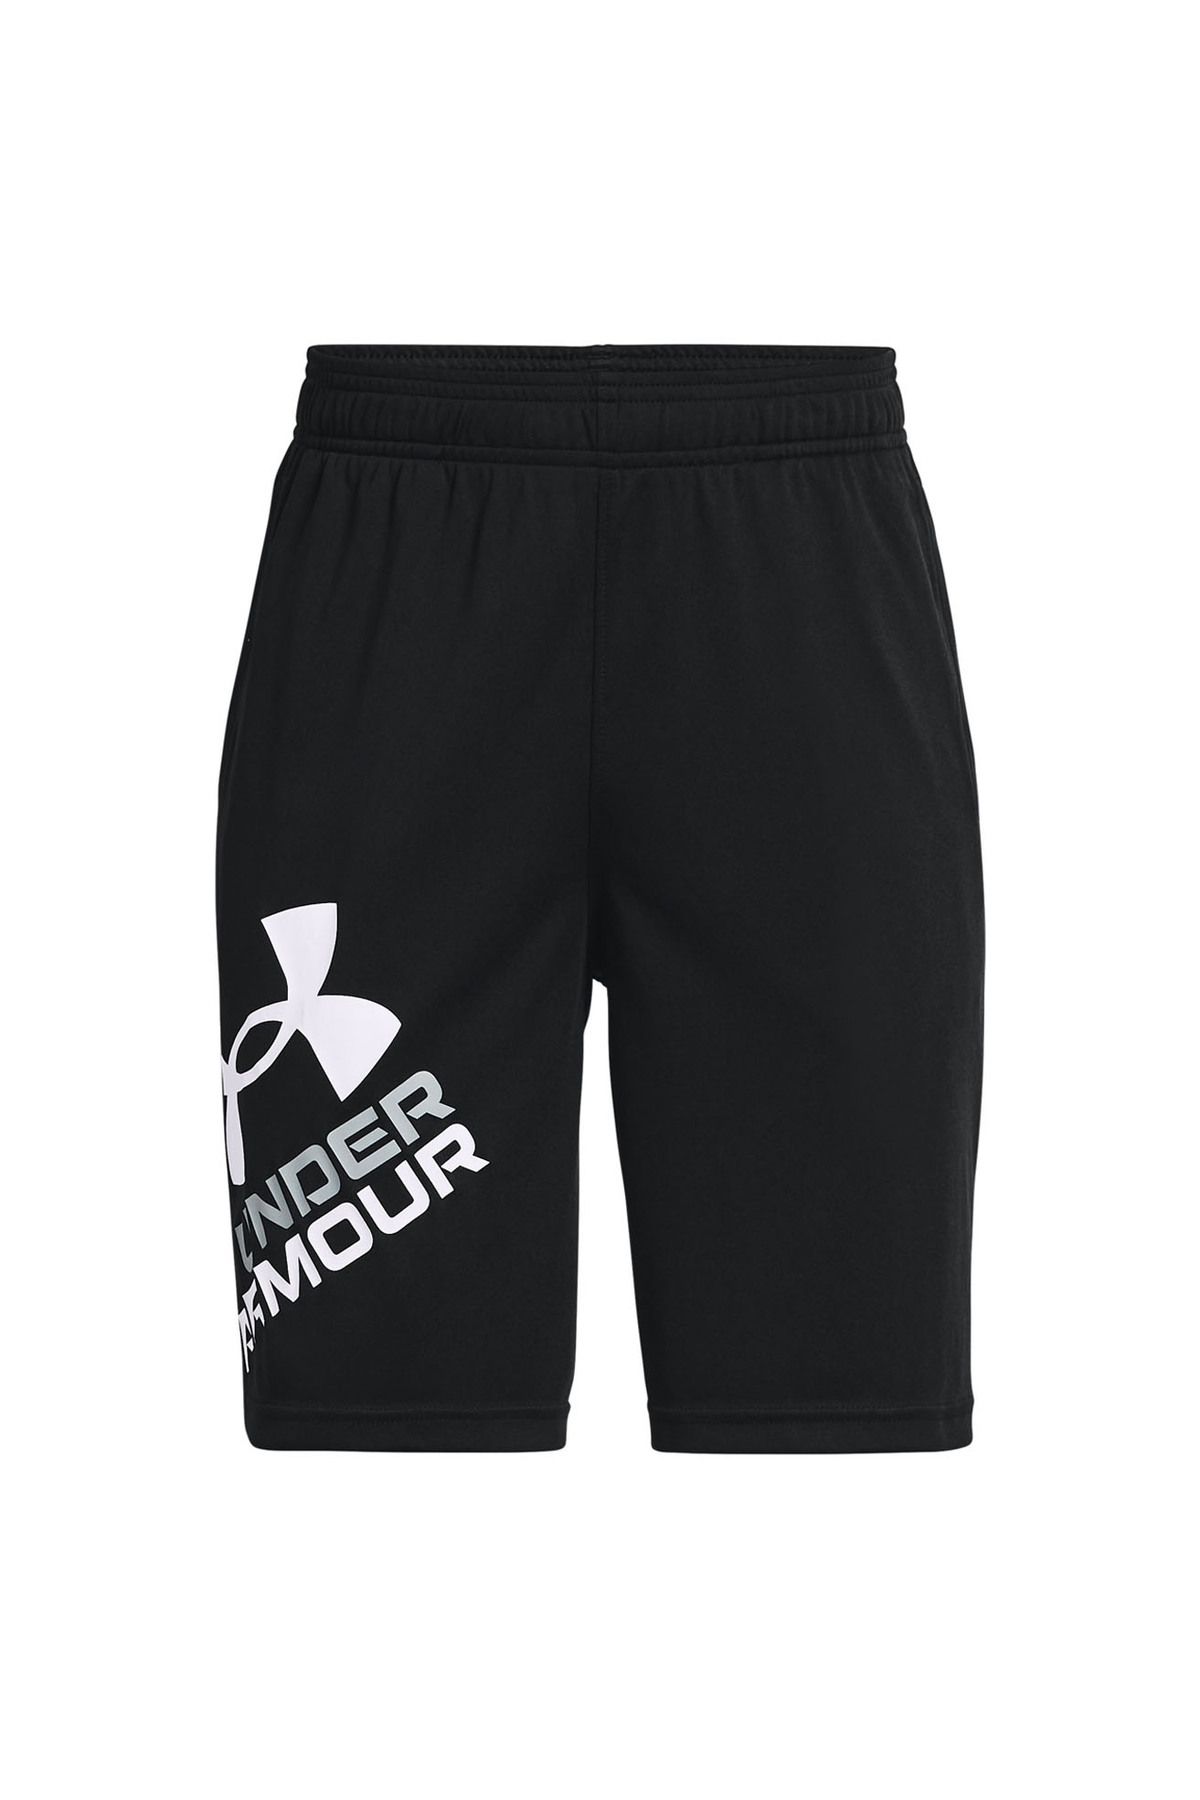 Under Armour %100 Polyester